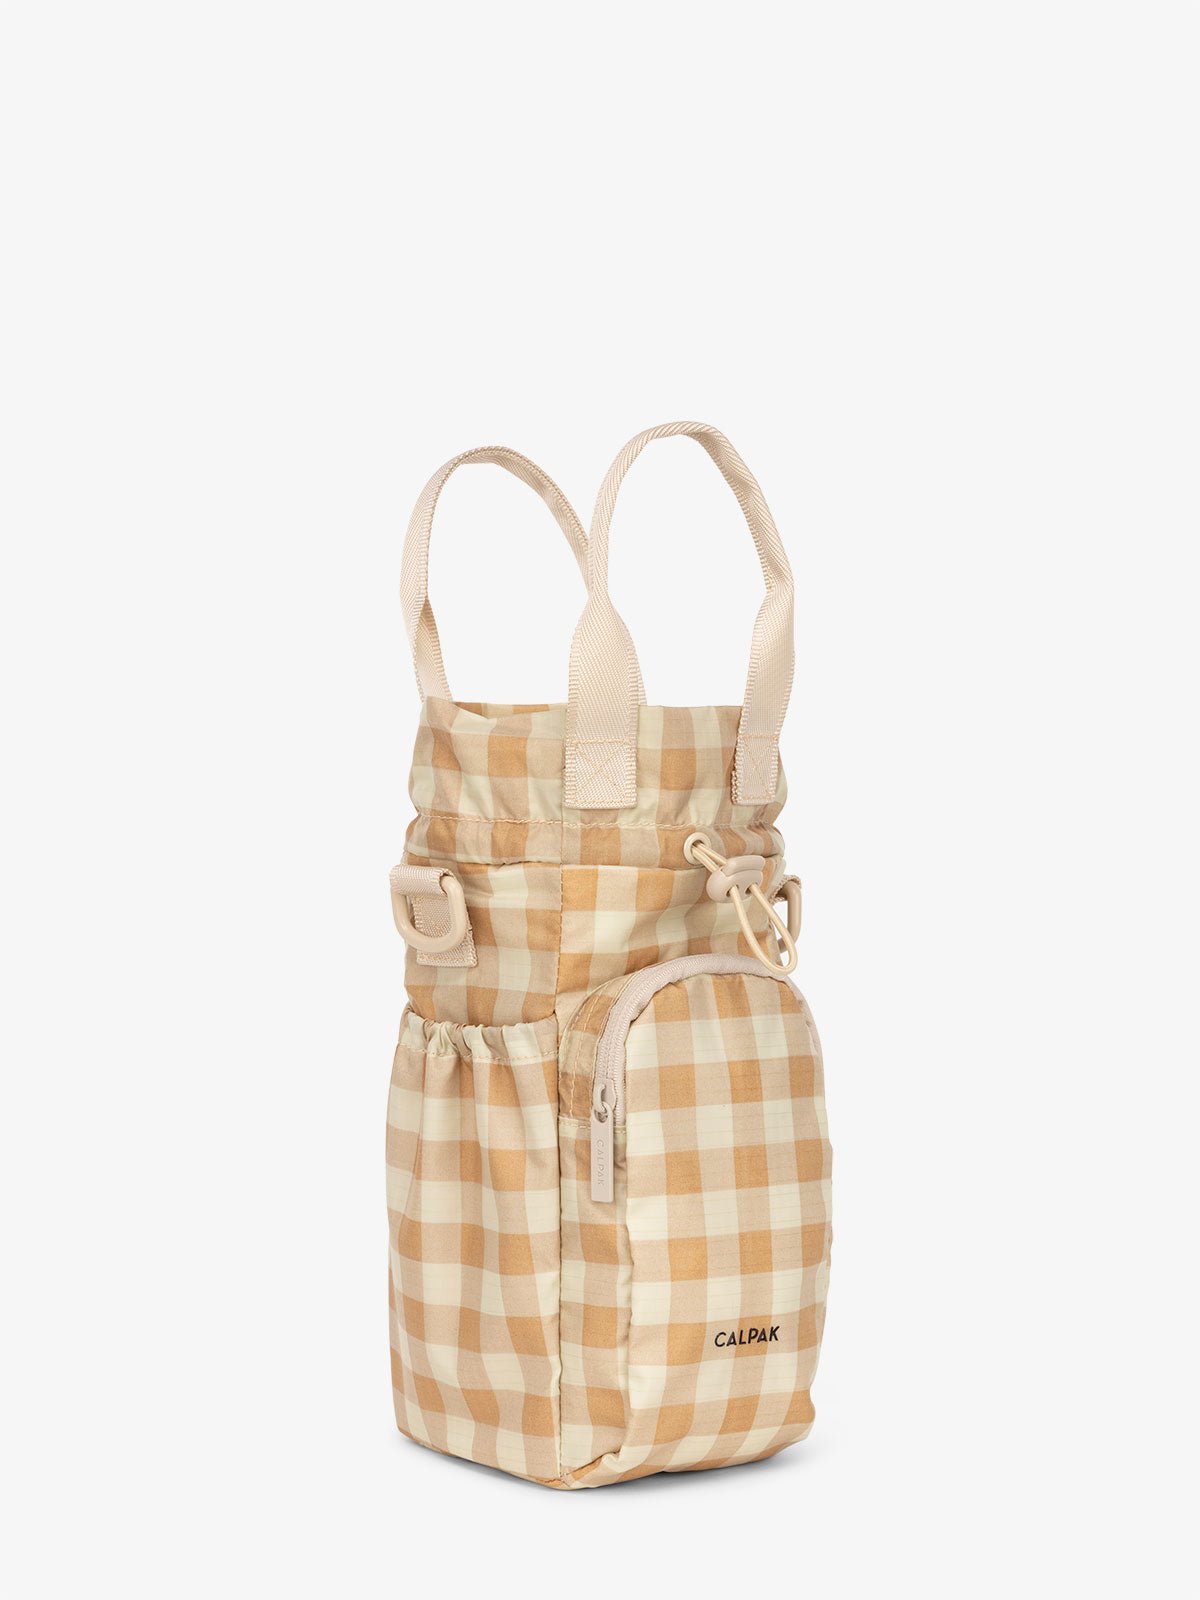 water bottle carrier for hiking in gingham